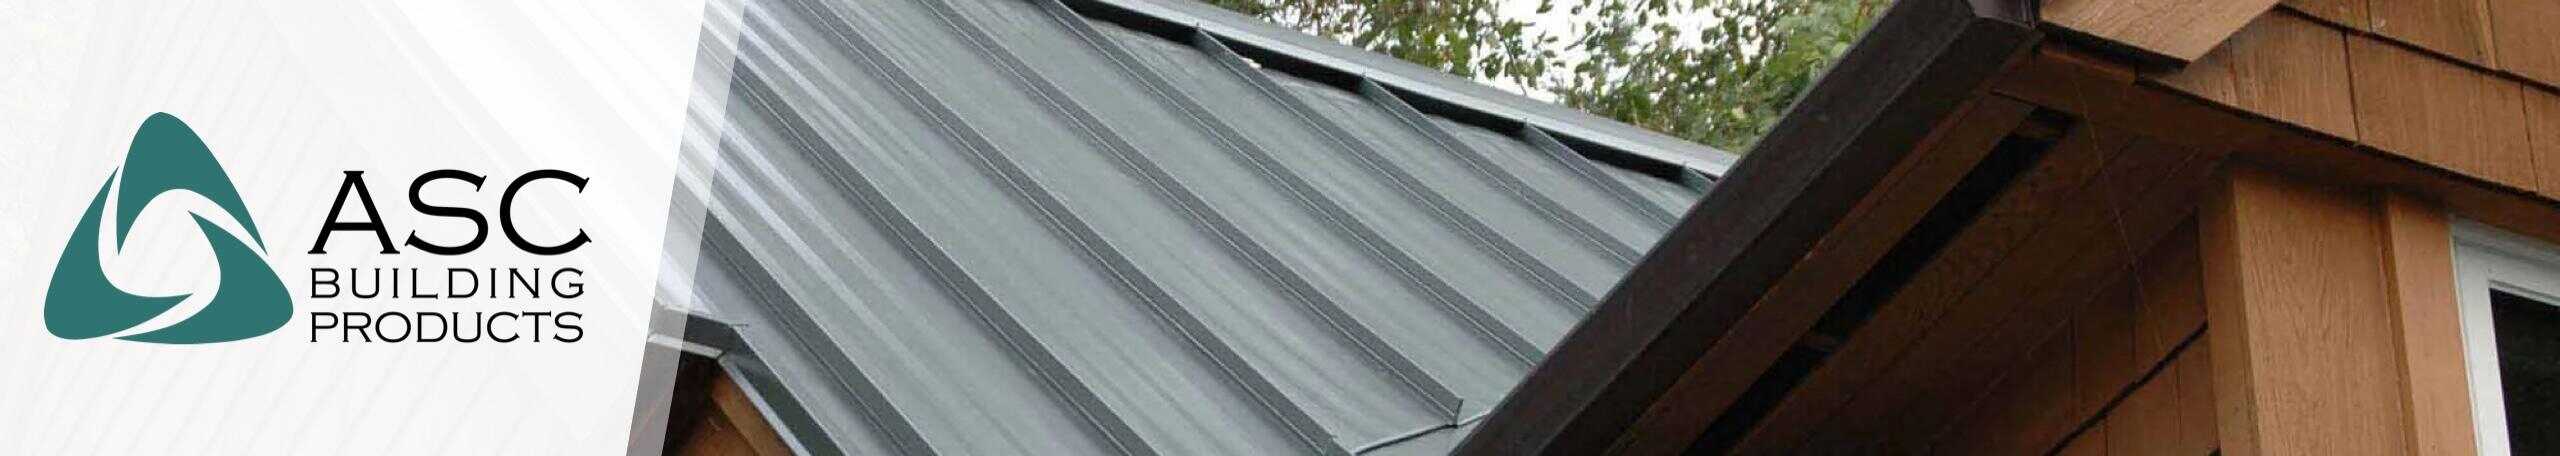 ASC Metal Roofing logo with metal roof on home